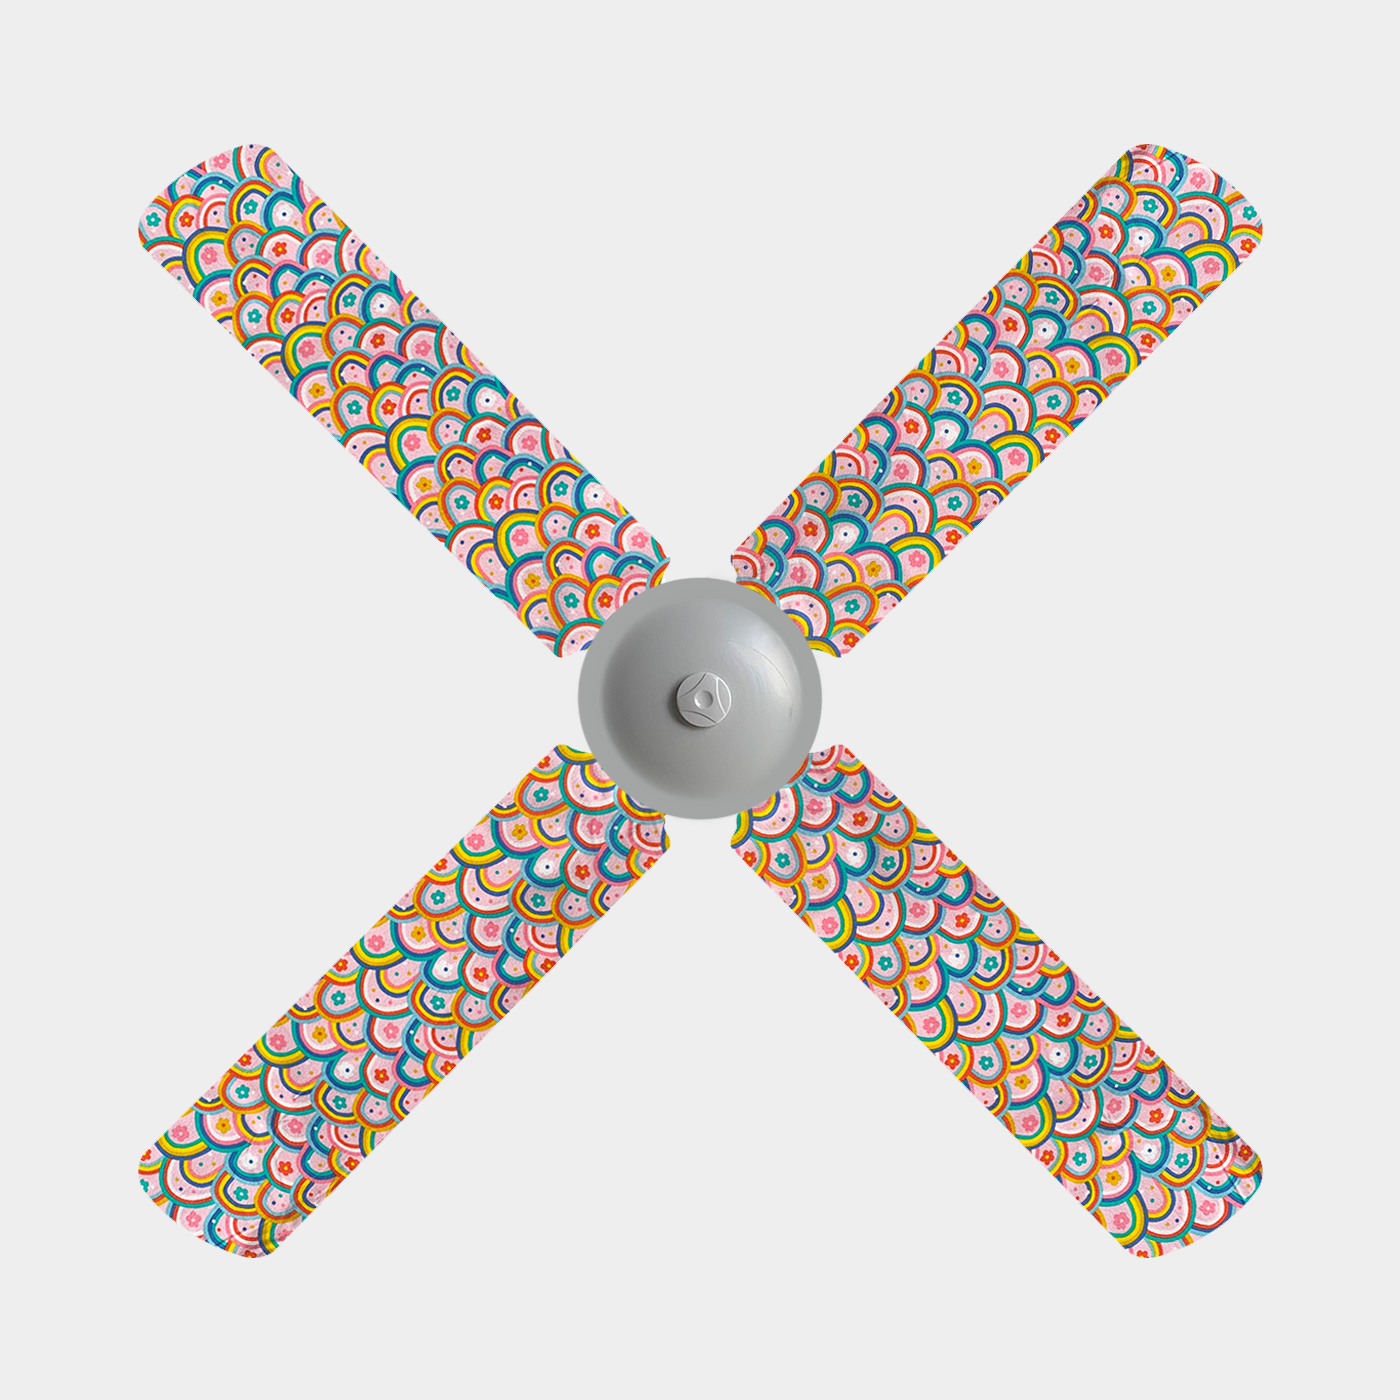 Ceiling fan covers with red, yellow, blue rainbows with small flowers on a pink background pattern